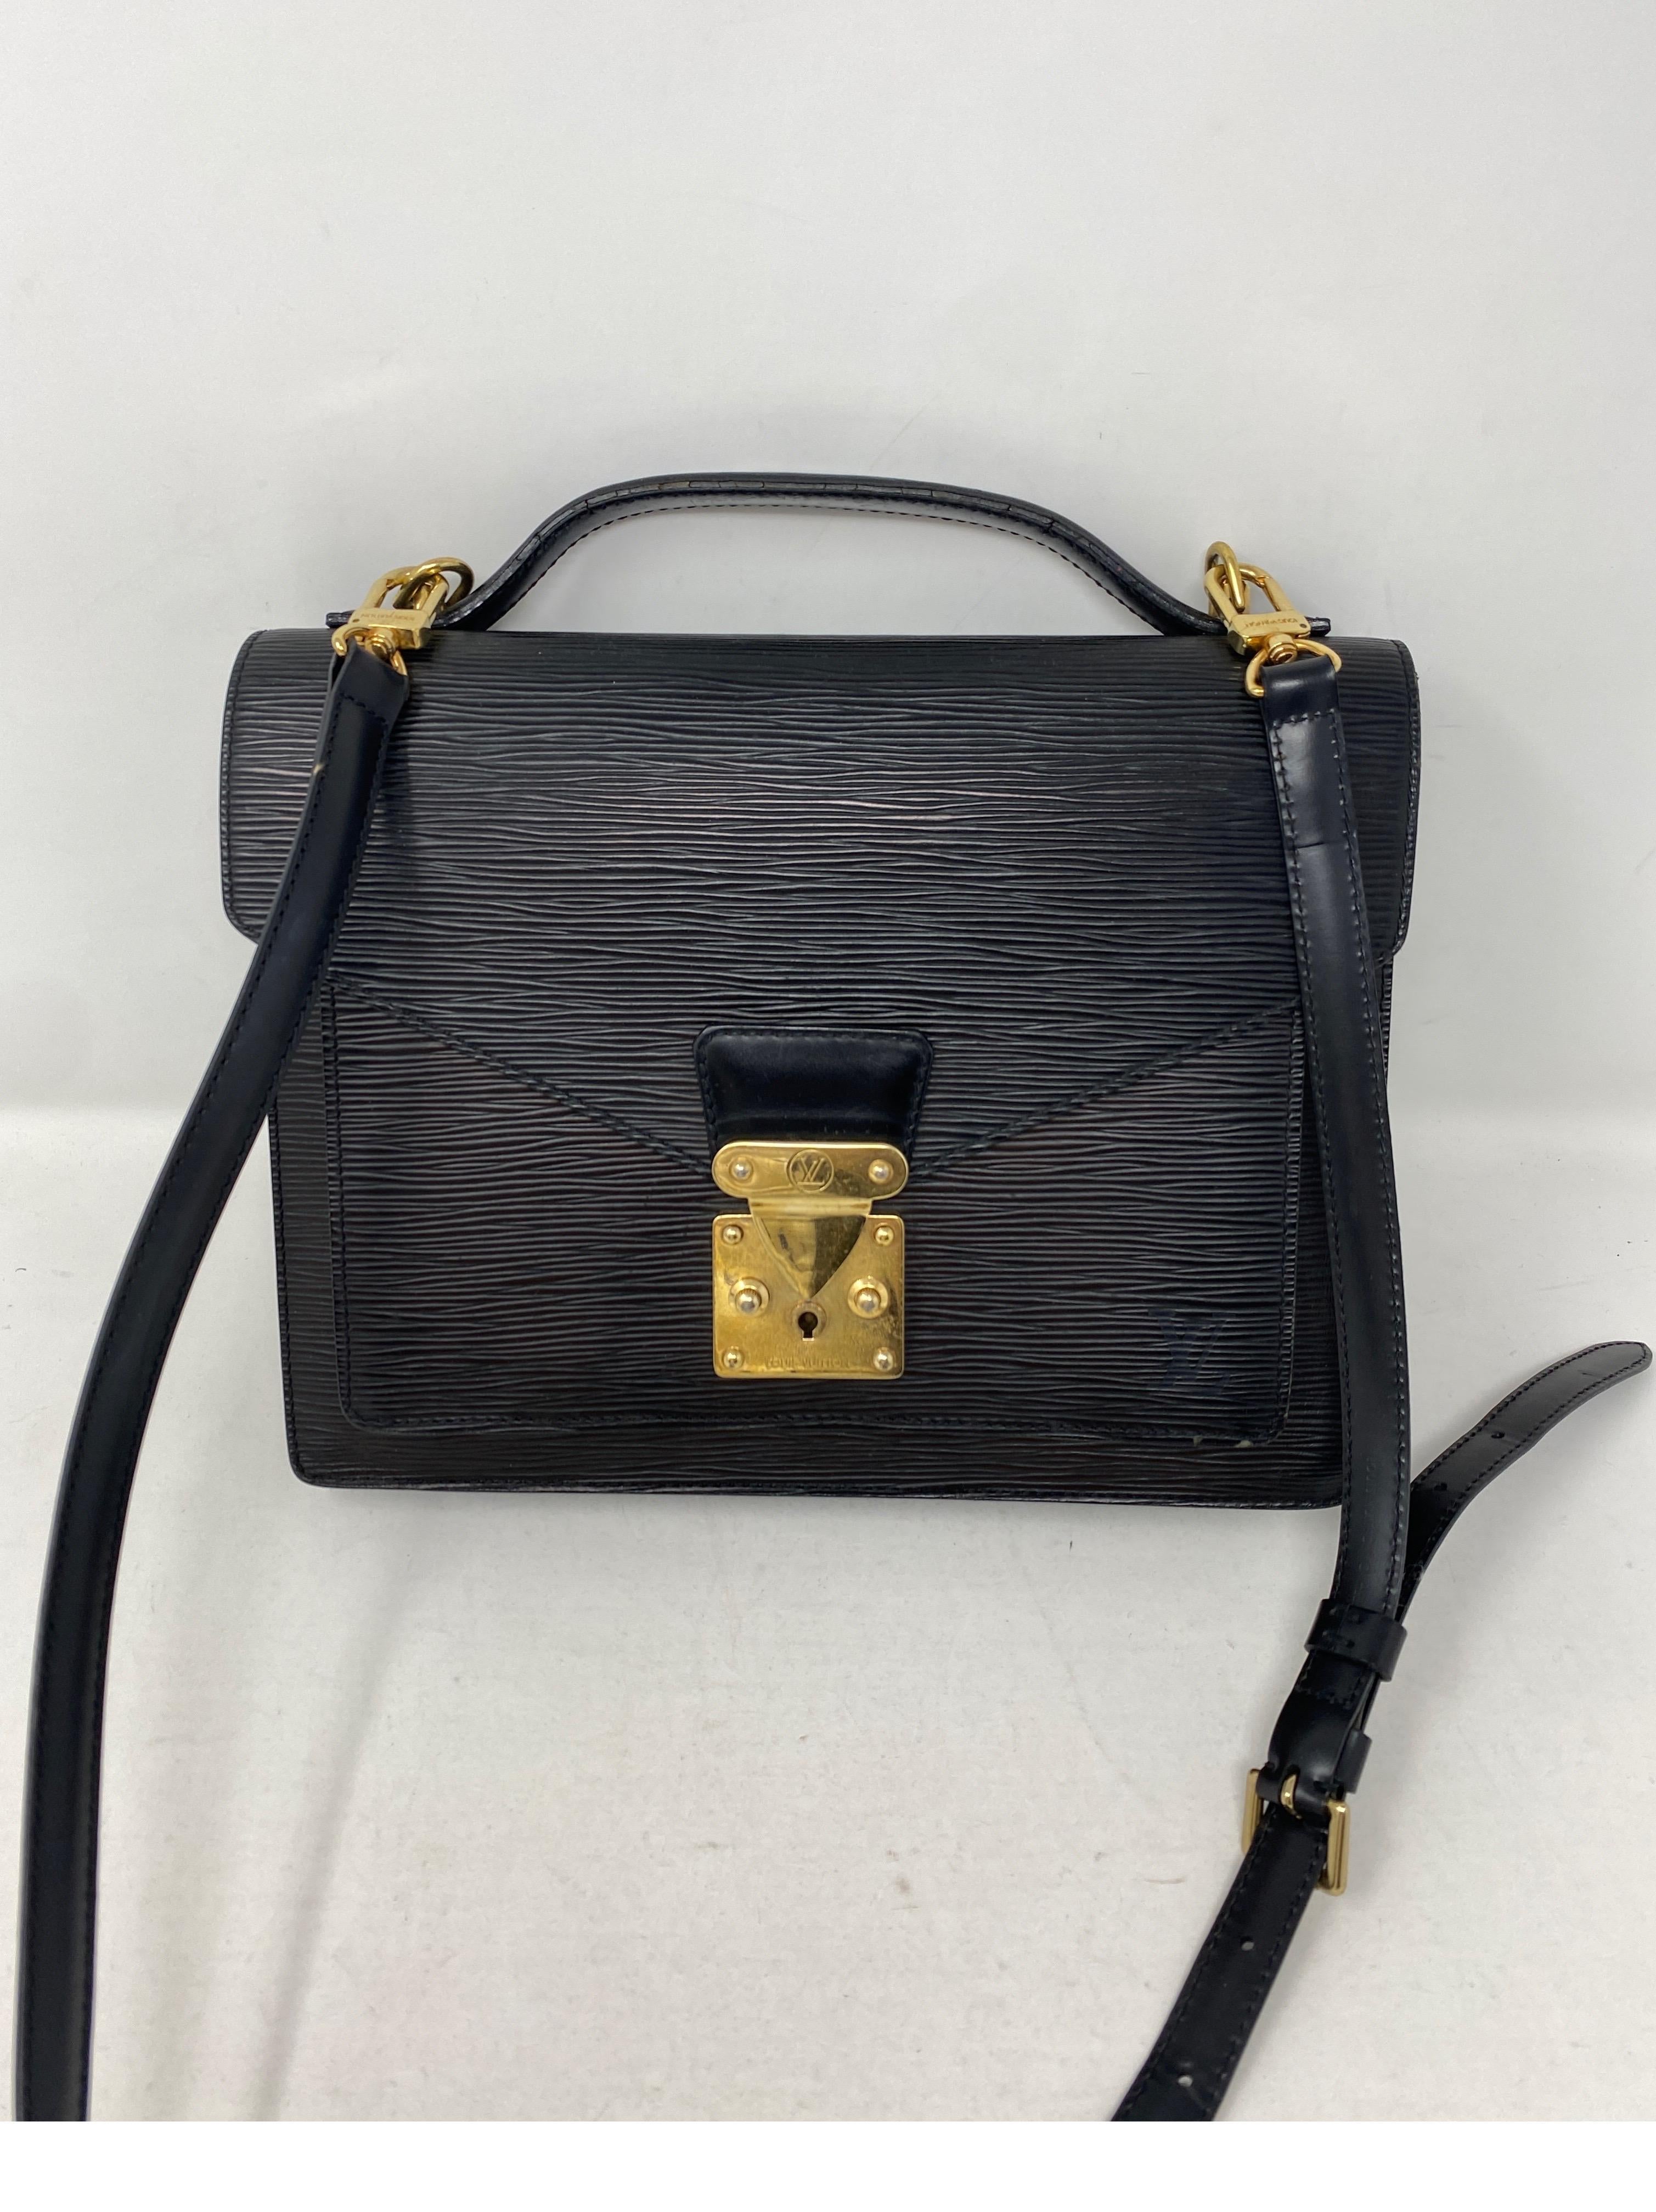 Louis Vuitton Monceau Epi Crossbody Bag. Black epi leather. Good condition. Gold hardware. Can be worn as a clutch or as a crossbody. Vintage retired style by LV. Guaranteed authentic. 